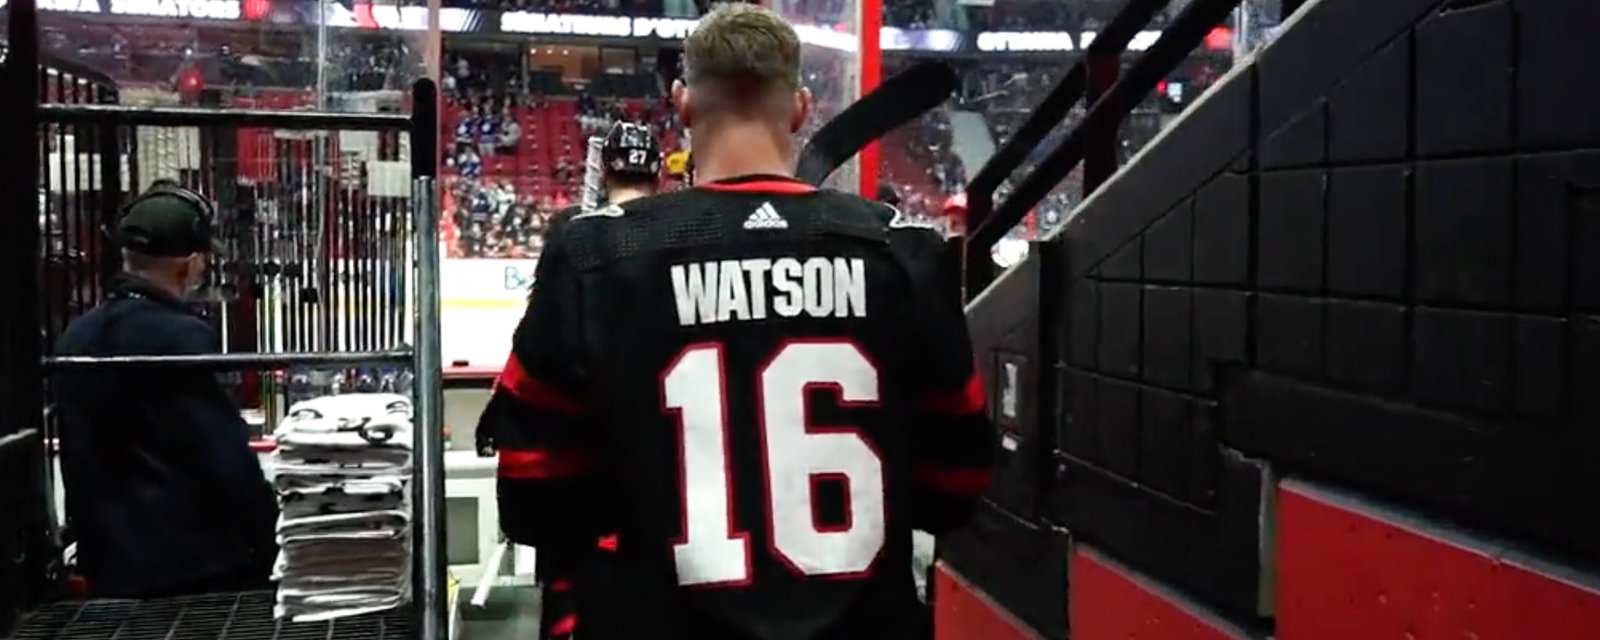 Classy move pulled for Senators’ Austin Watson on special day